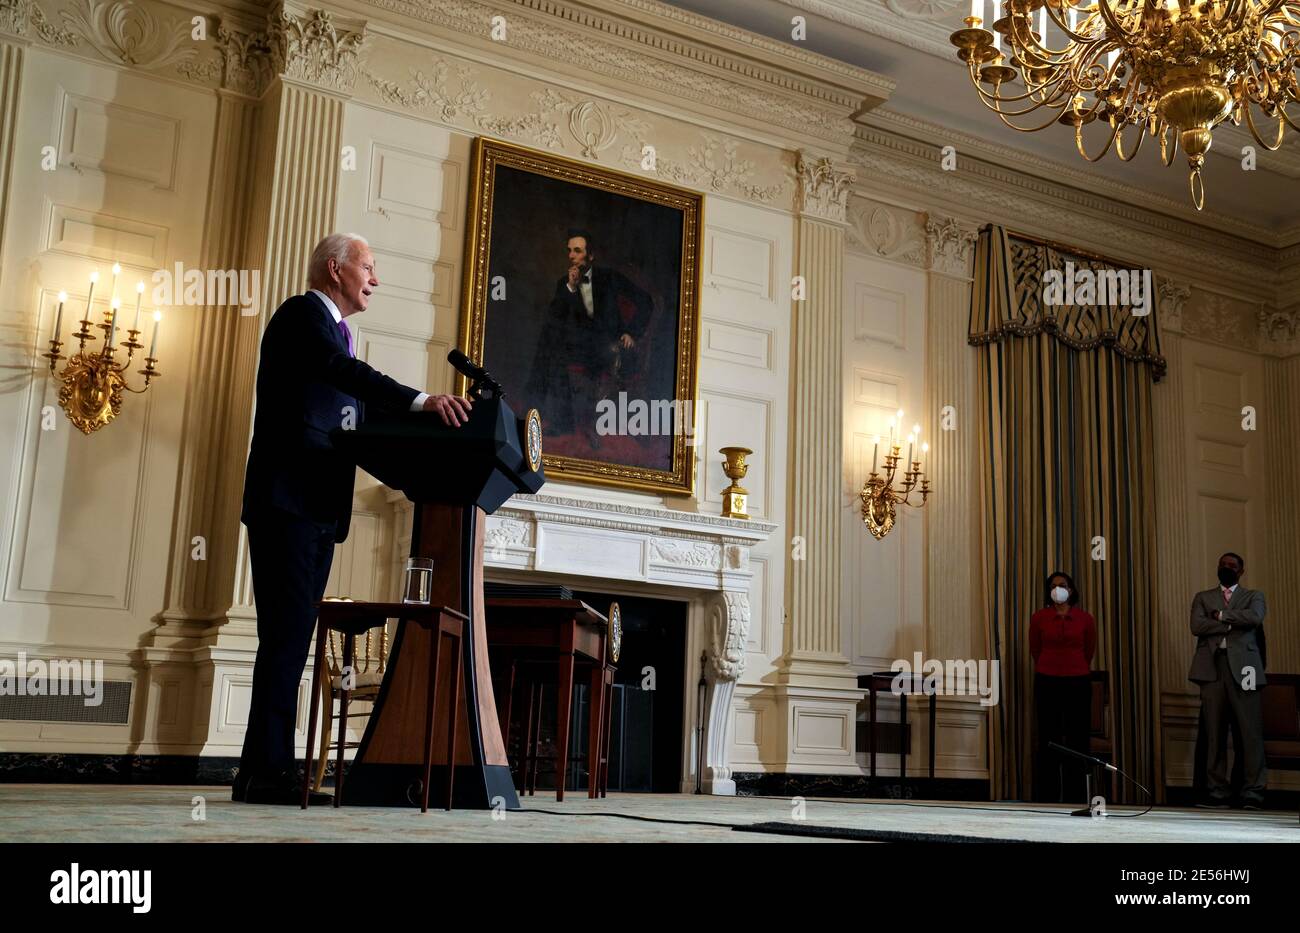 United States President Joe Biden delivers remarks outlining his racial equity agenda and signs executive actions in the State Dining Room of the White House, Tuesday, Jan. 26, 2021. Credit: Doug Mills/Pool via CNP /MediaPunch Stock Photo